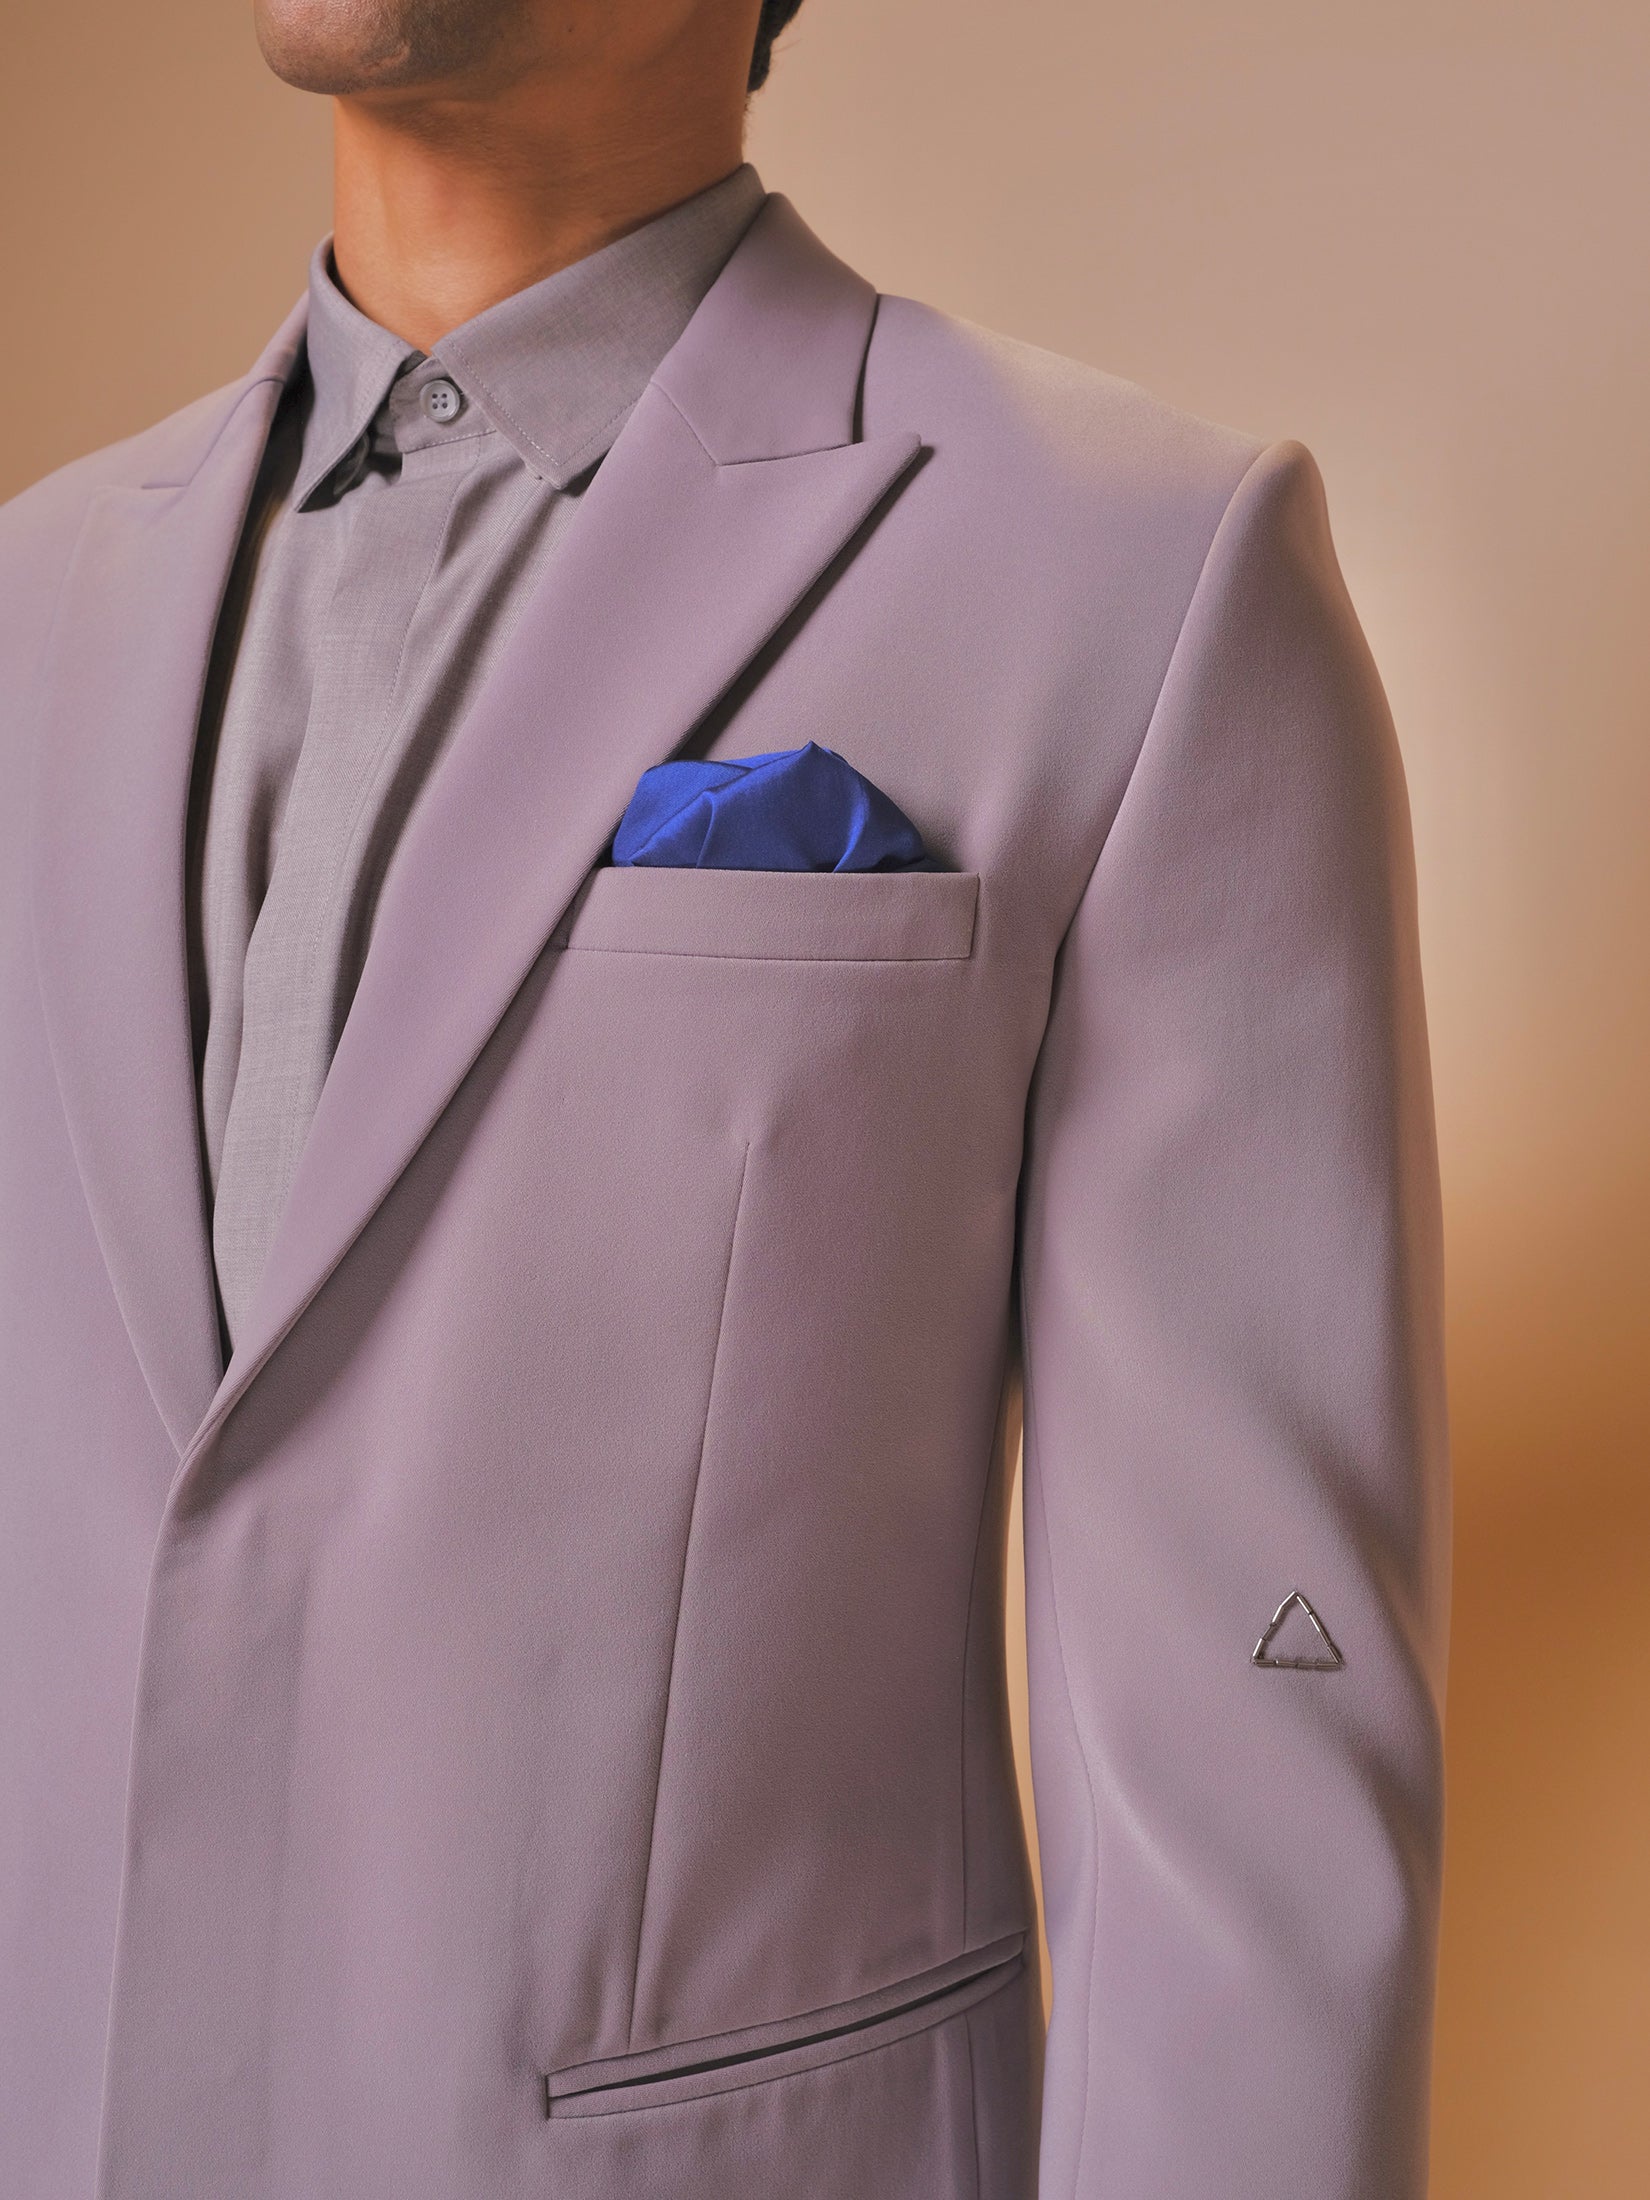 Grey Peak Shawl Lapel Suit With Embroidered Triangle Motif On Sleeves Paired With Trousers And Tonal Shirt